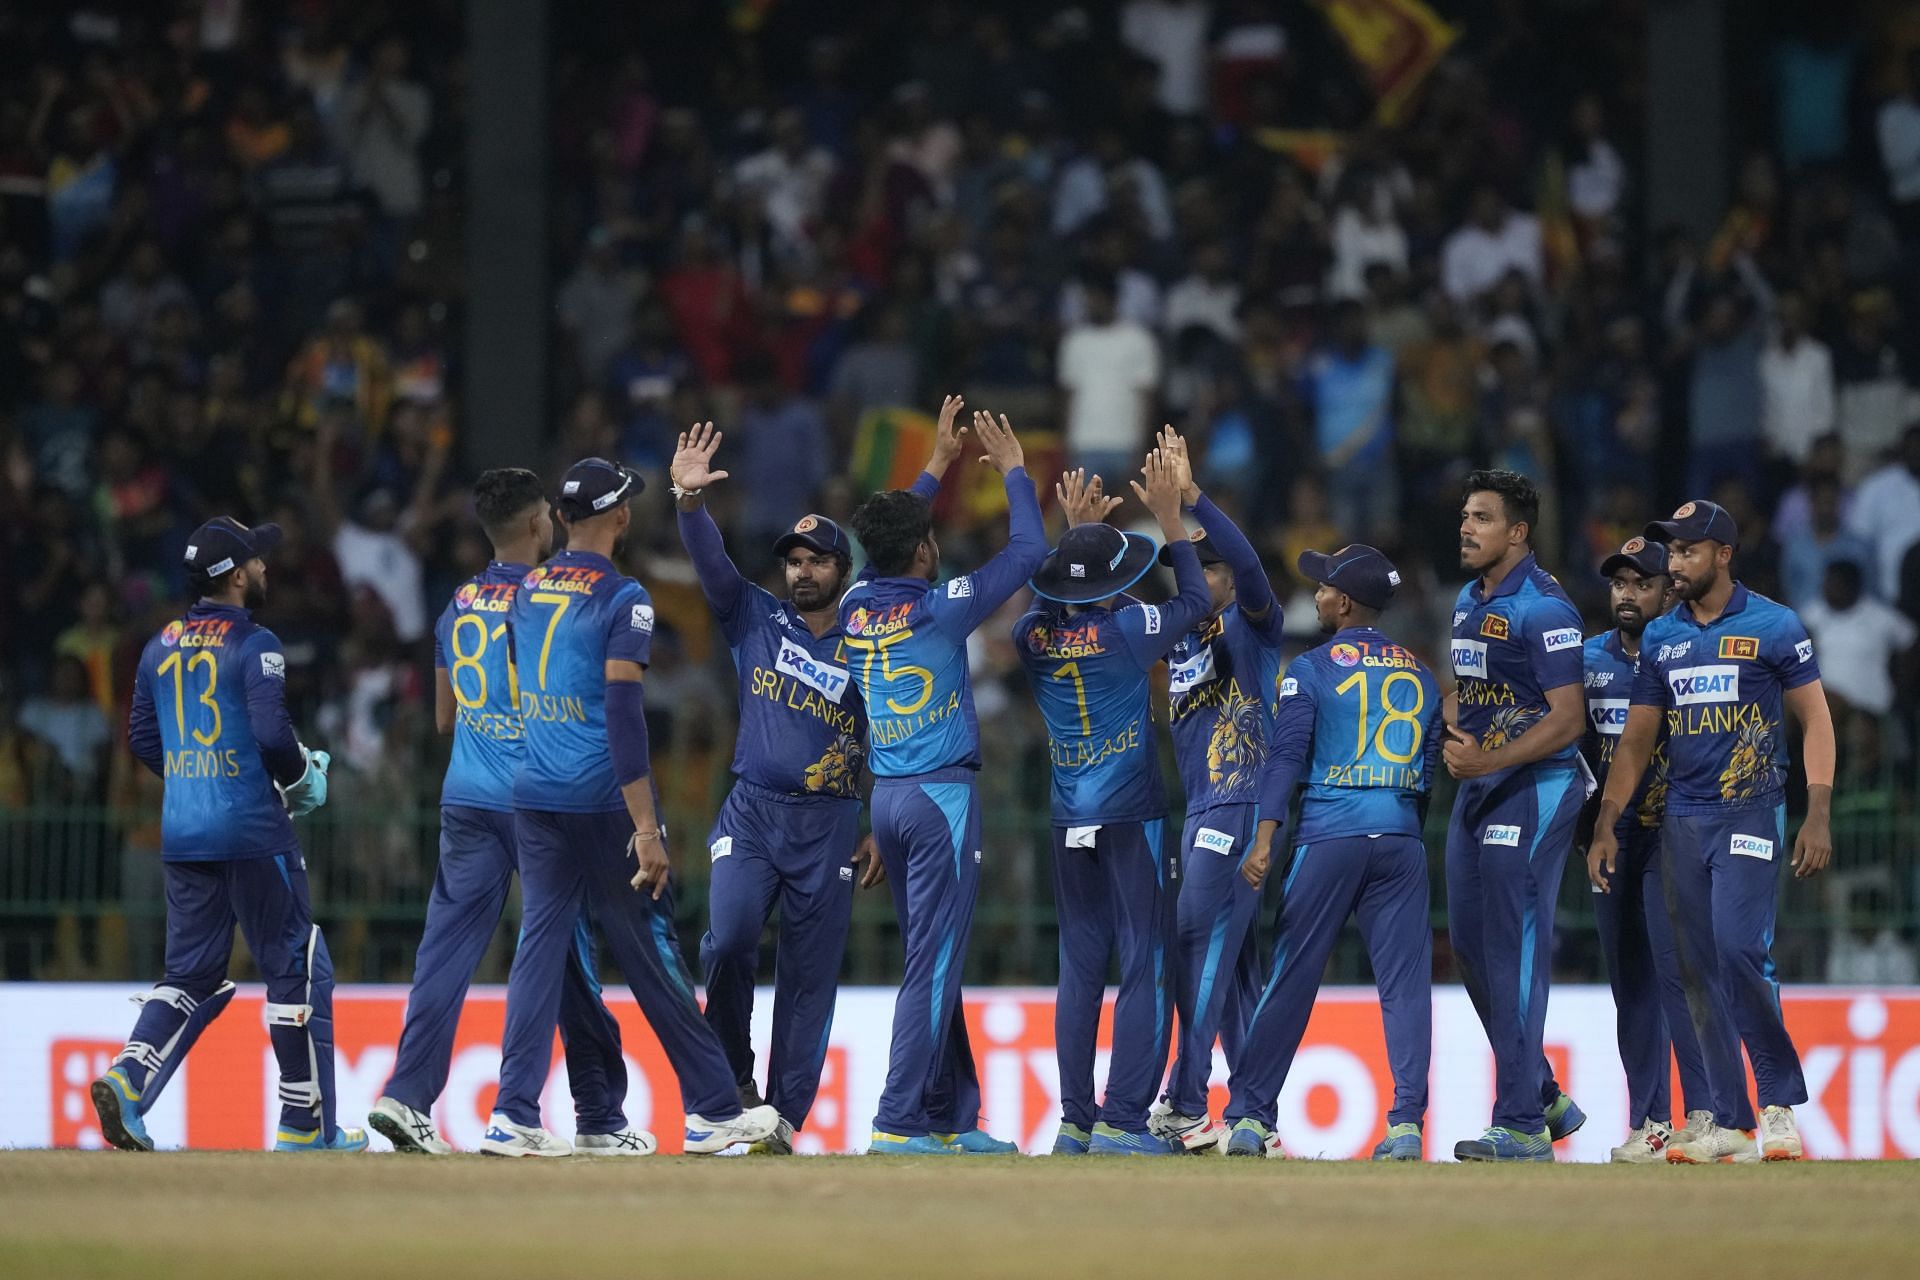 Sri Lanka were runners-up in the Asia Cup. (Pic: AP)